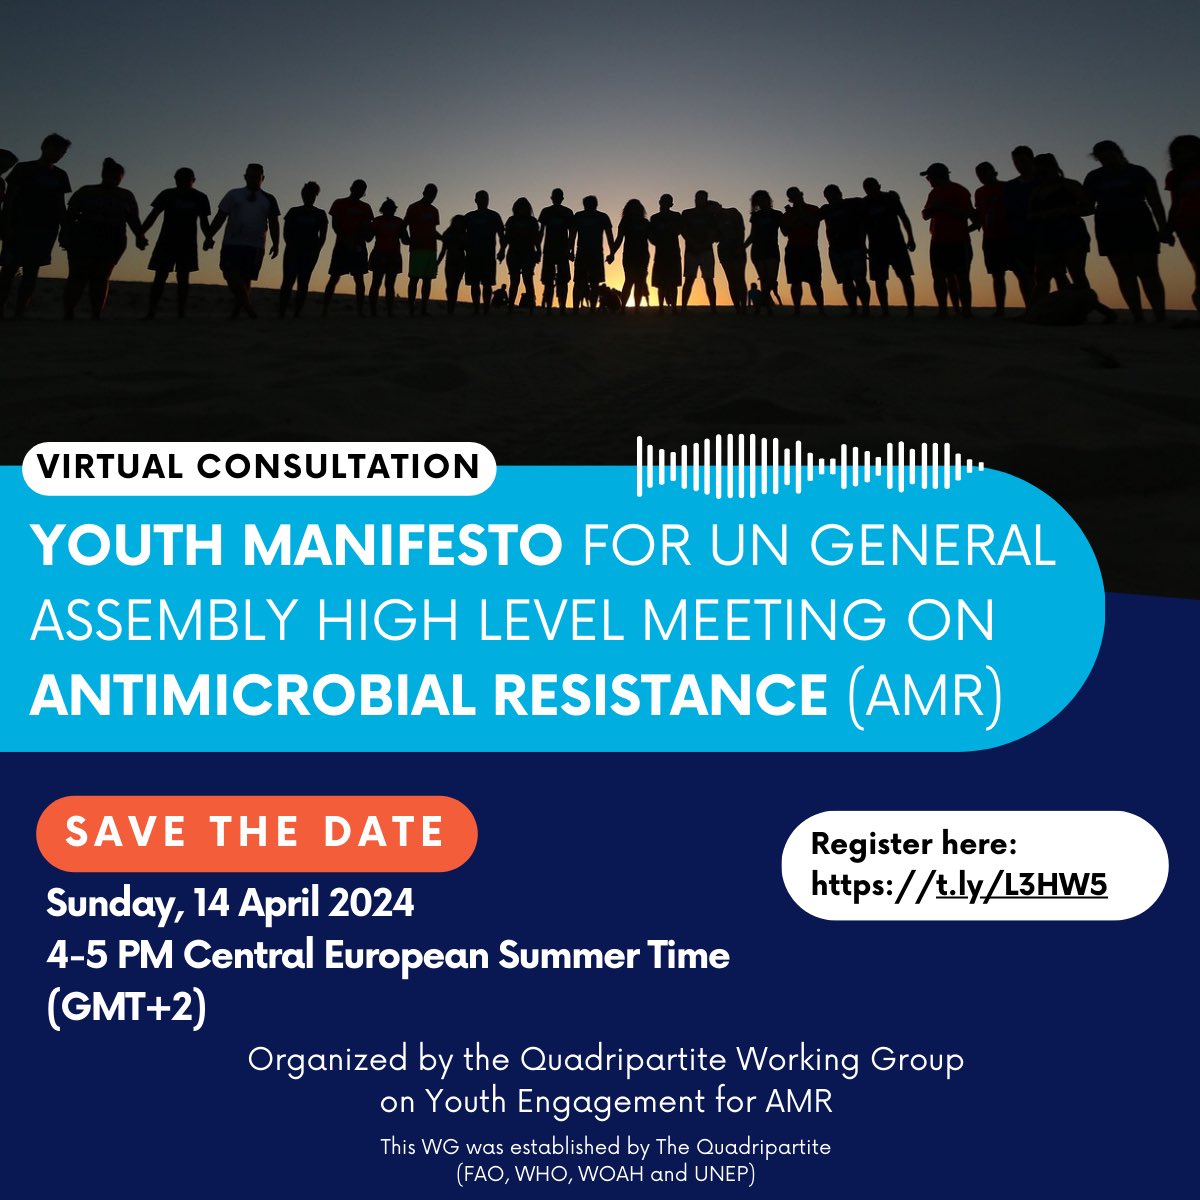 📢 Calling all #Youths to make pivotal contribution in catalyzing action against #AntimicrobialResistance

This weekend the Quadripartite Working Group on Youth Engagement for #AMR is calling you to share your voice to @UN  General Assembly High Level Meeting #UNGA #HLM on #AMR.…